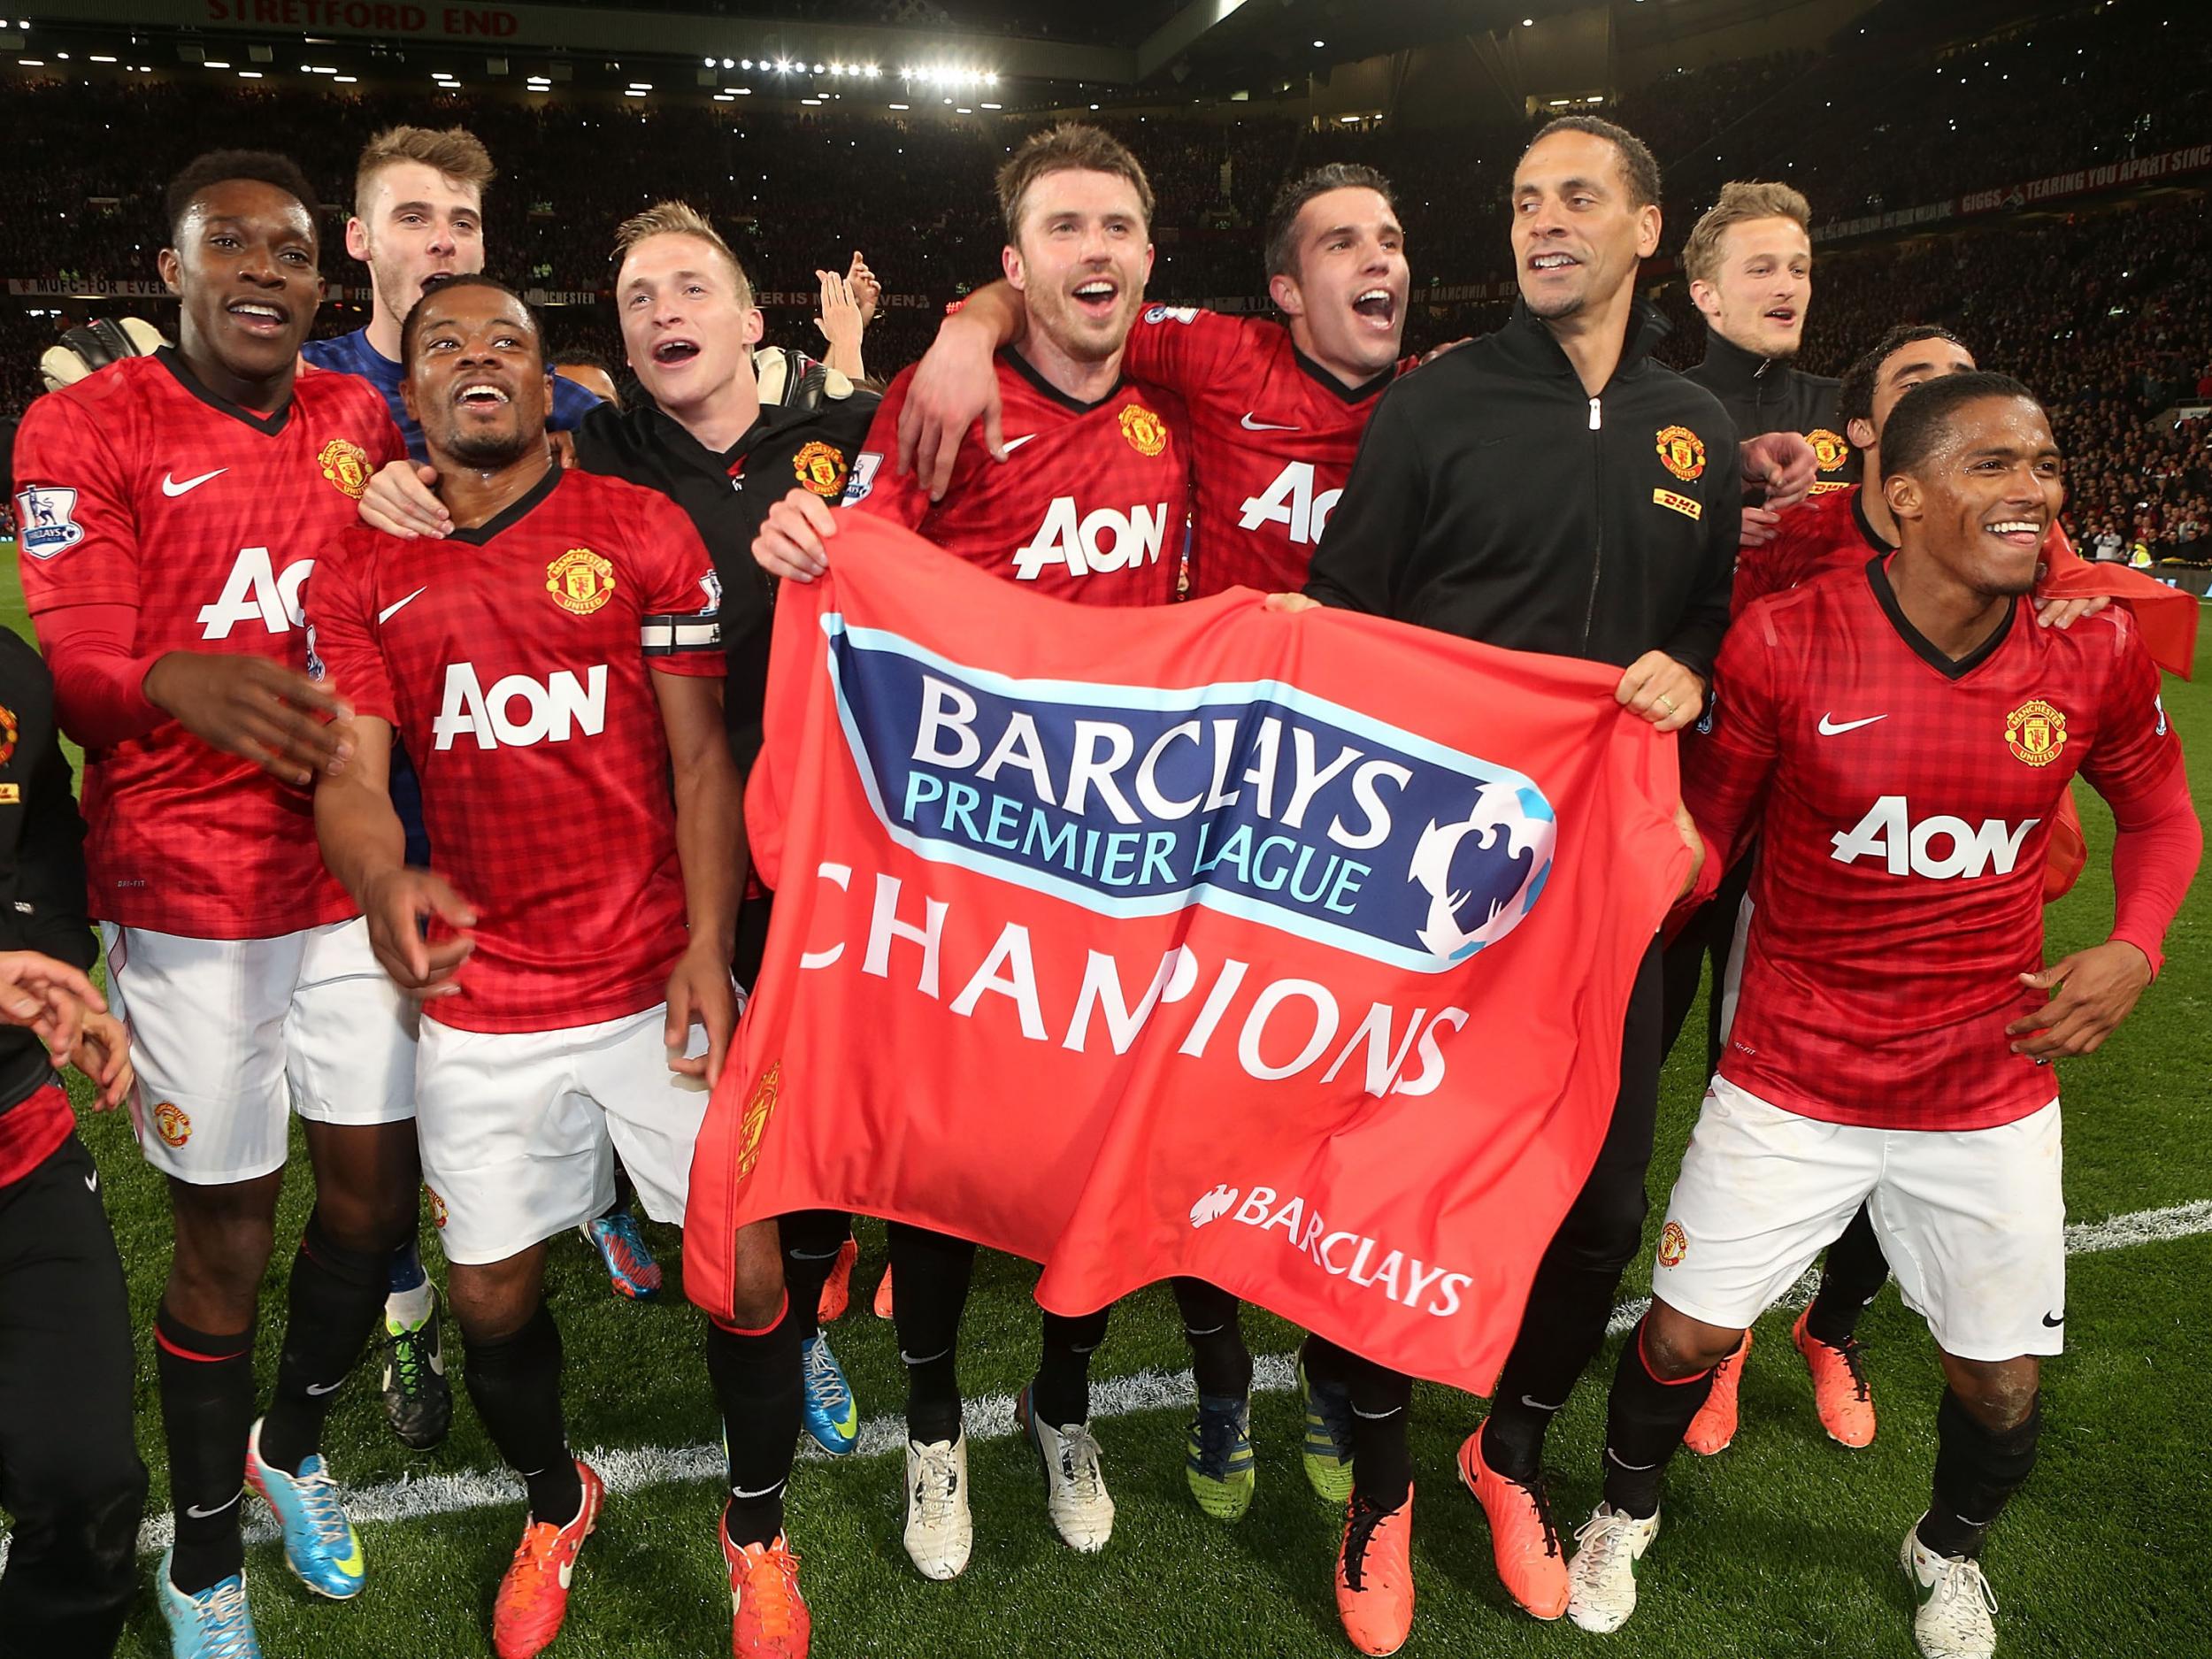 Manchester United's 2013 title win was inevitable from early on